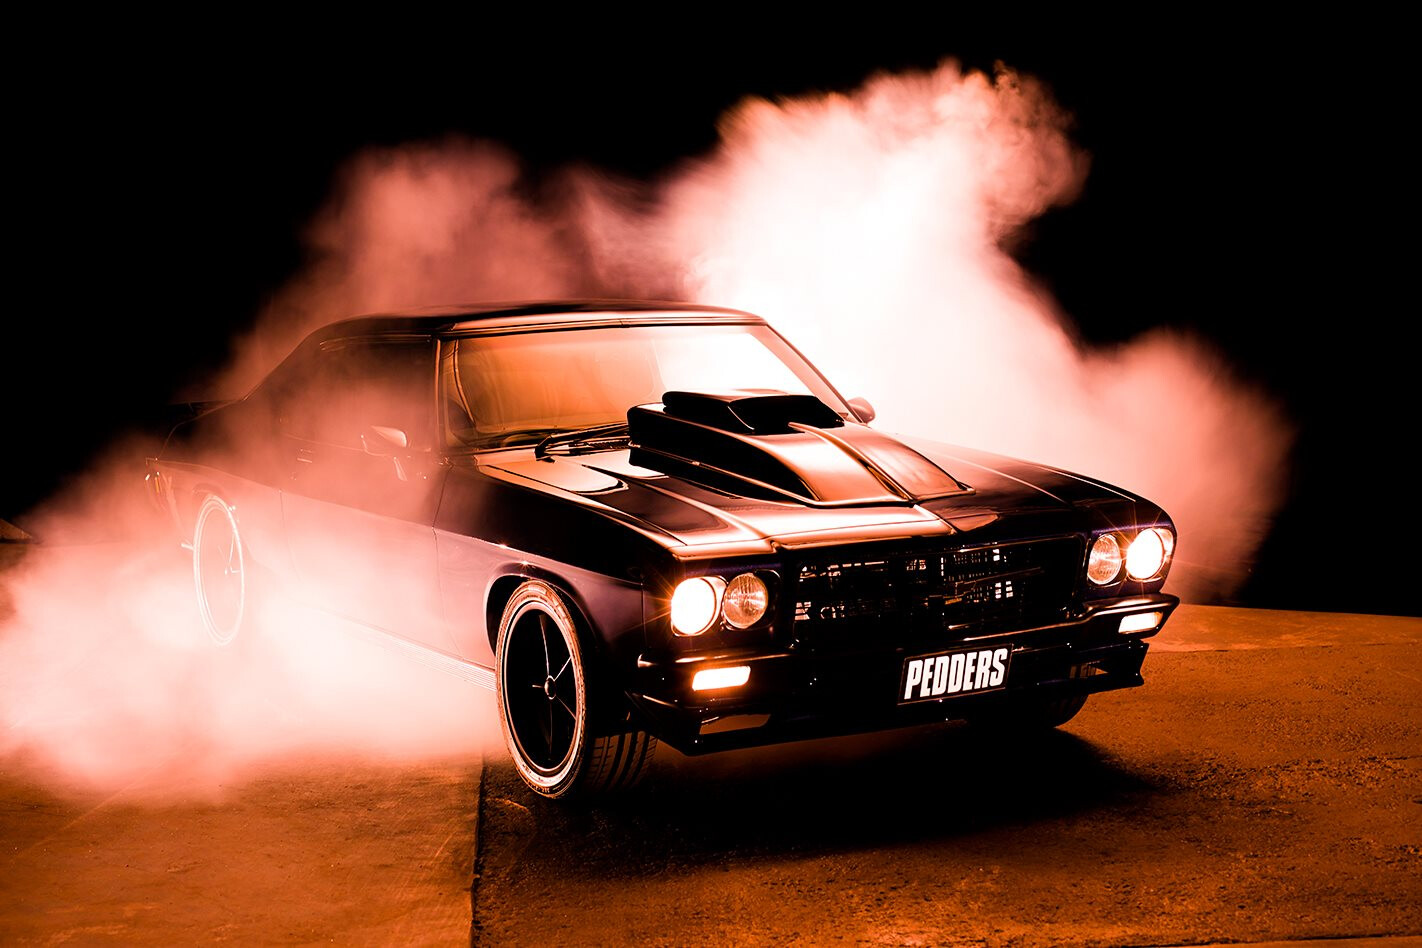 VIDEO: PEDDERS BUILDS A MAD MAX-STYLE MONARO